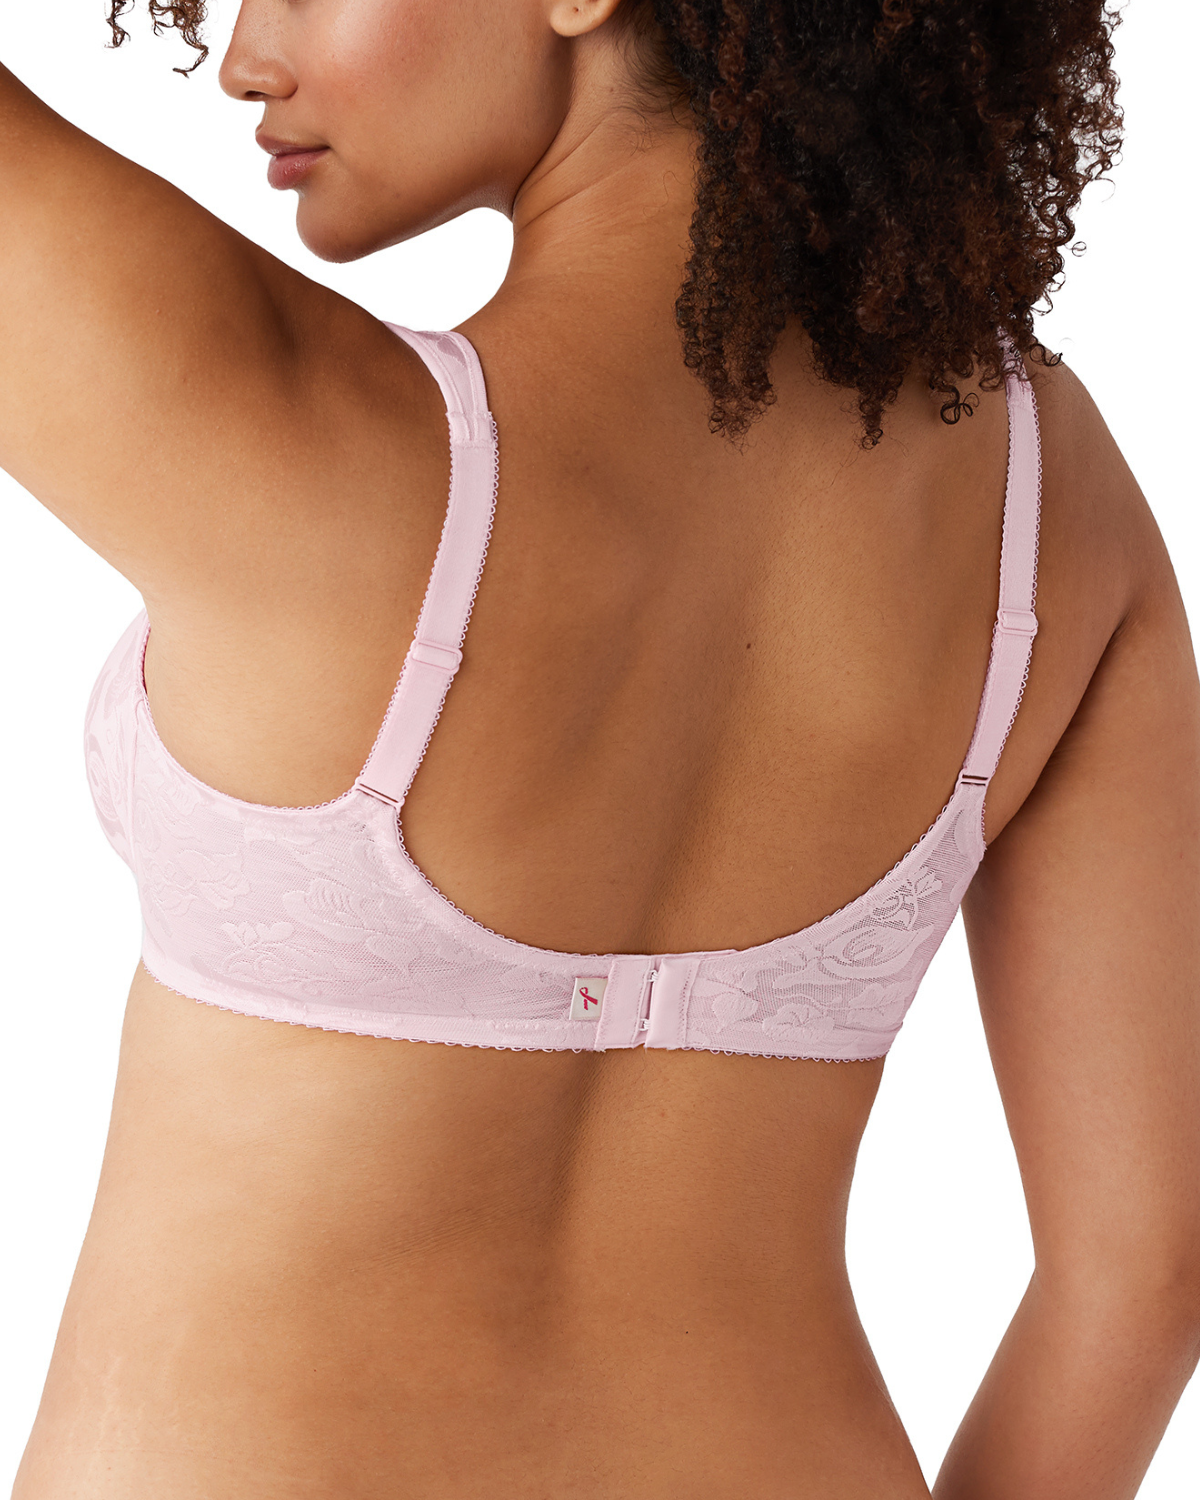 Model wearing a soft cup underwire bra in light pink